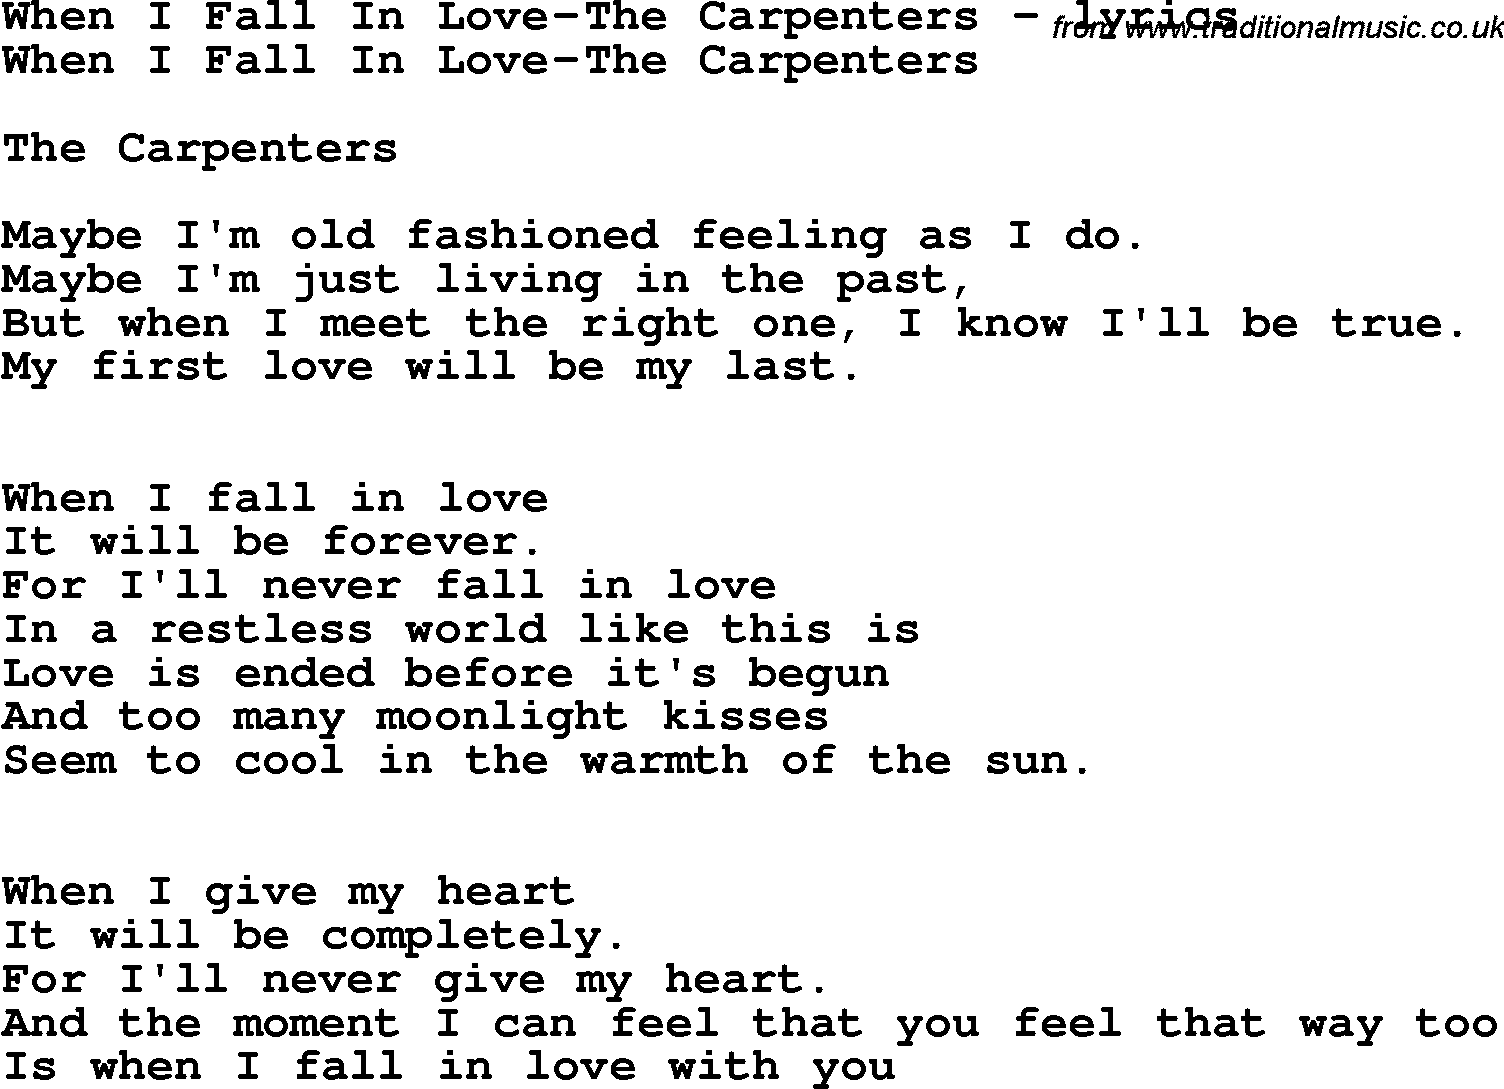 Love Song Lyrics for: When I Fall In Love-The Carpenters